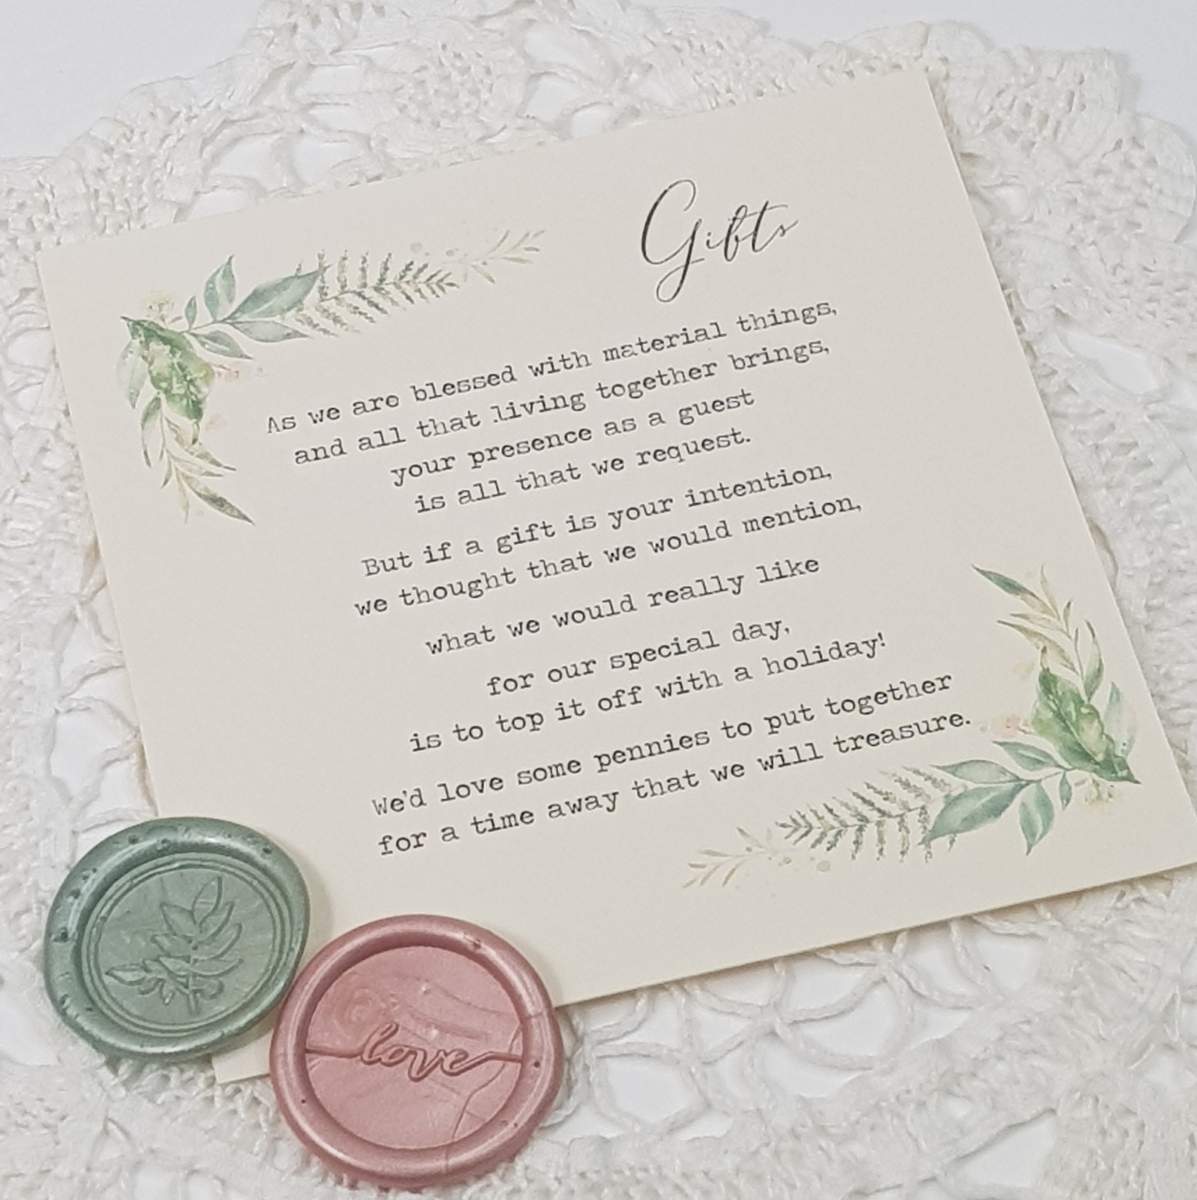 a wedding invite details card with a gift wish poem, decorated on the edges with a pretty greenery foliage design